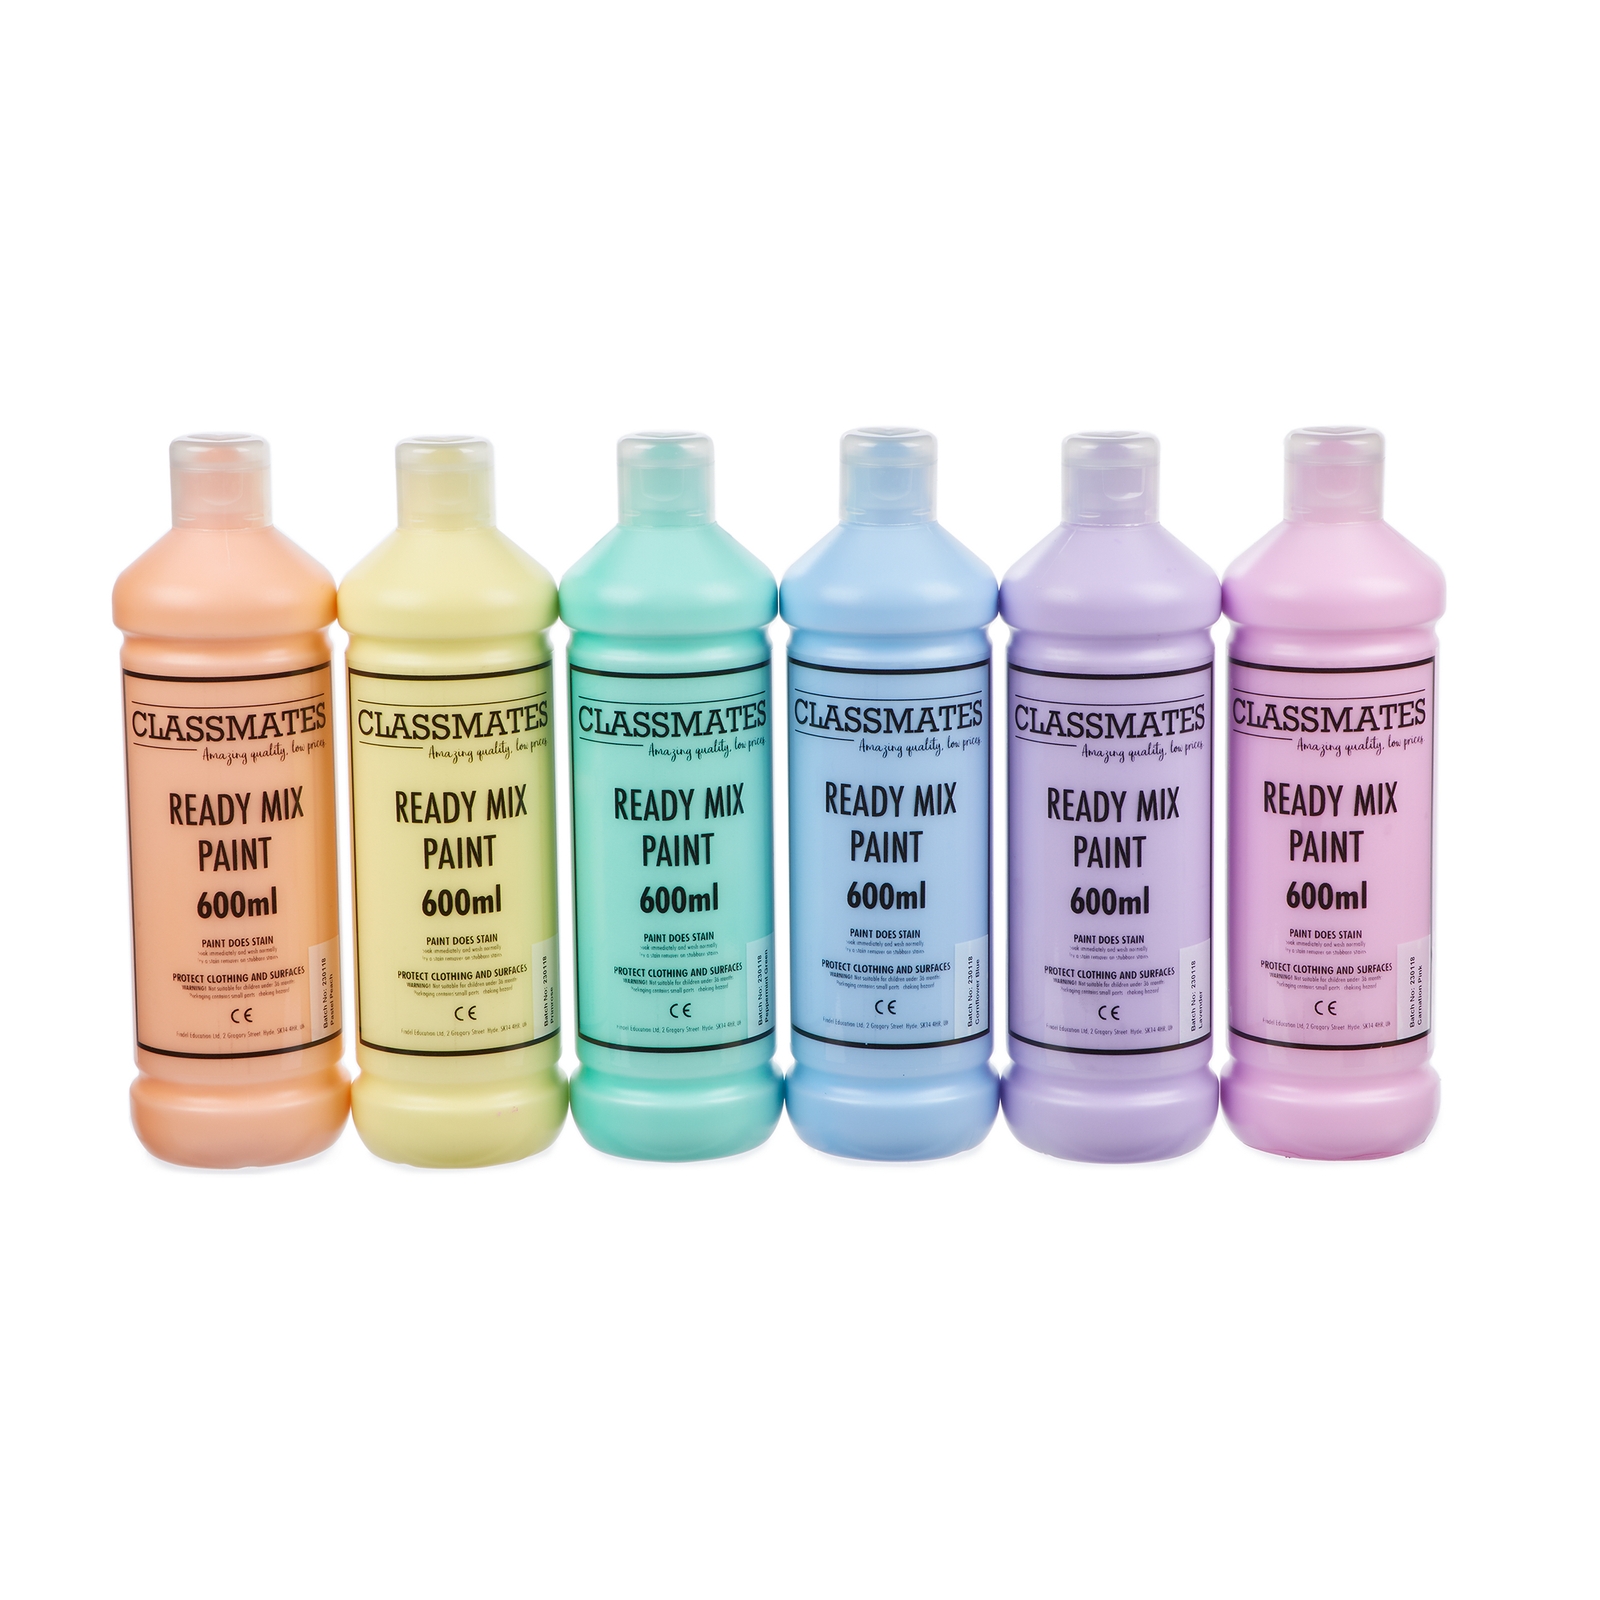 Classmates Ready Mixed Paint in Pastels - Pack of 6 - 600ml Bottle